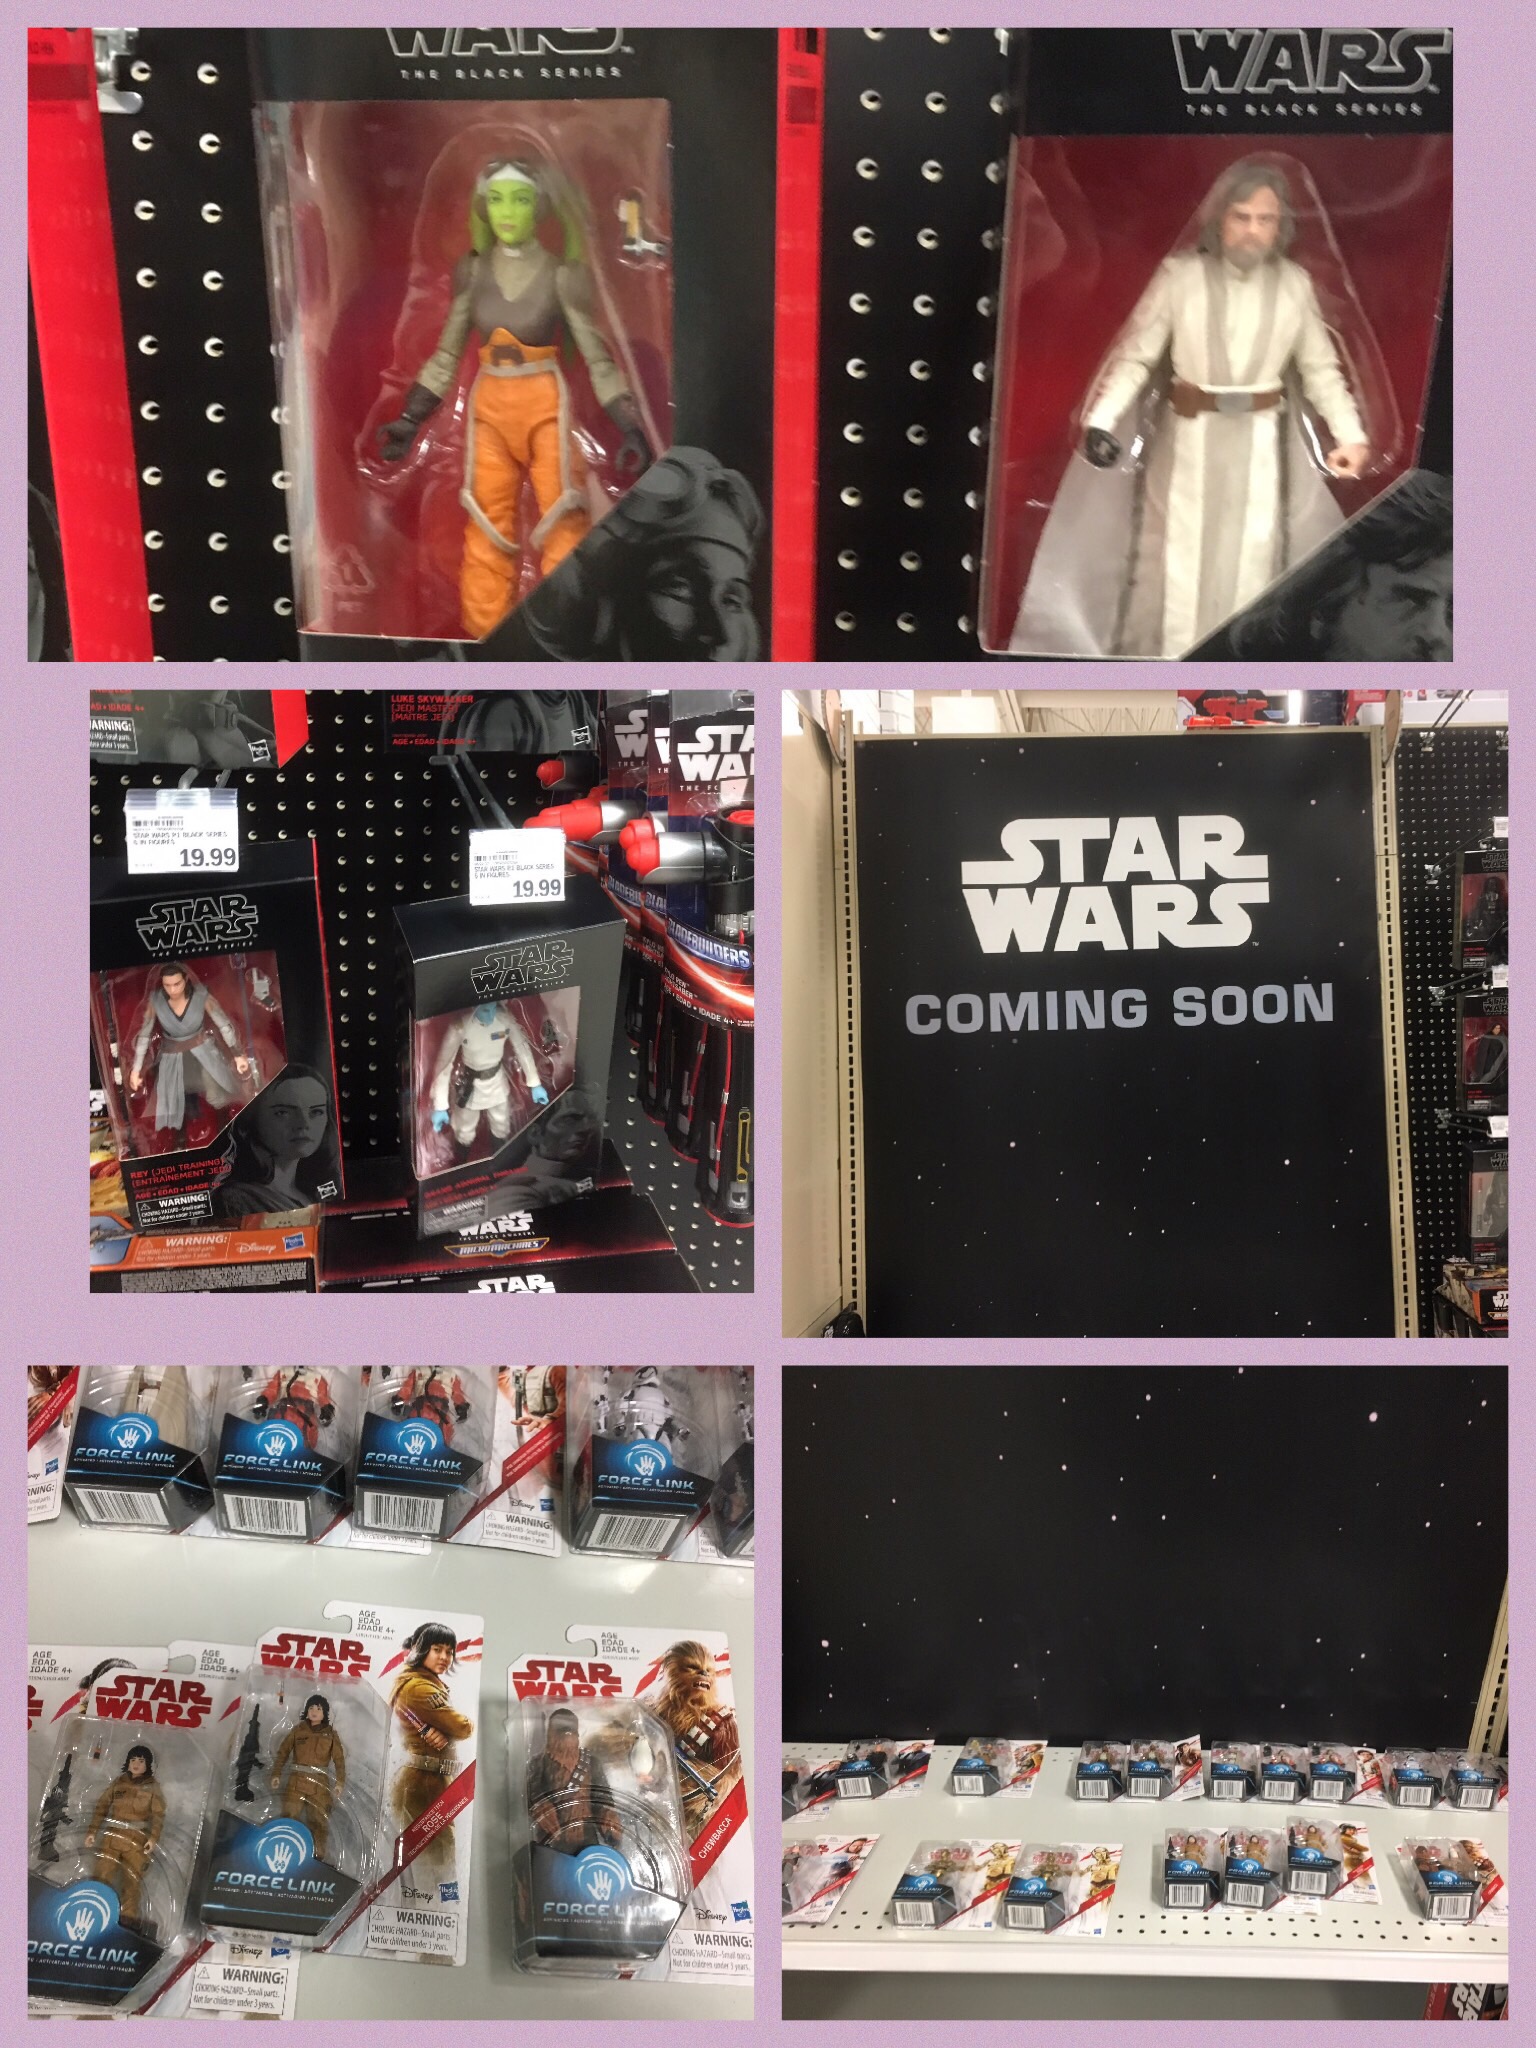 A few of the new Star Wars Figures available at my local Meijer